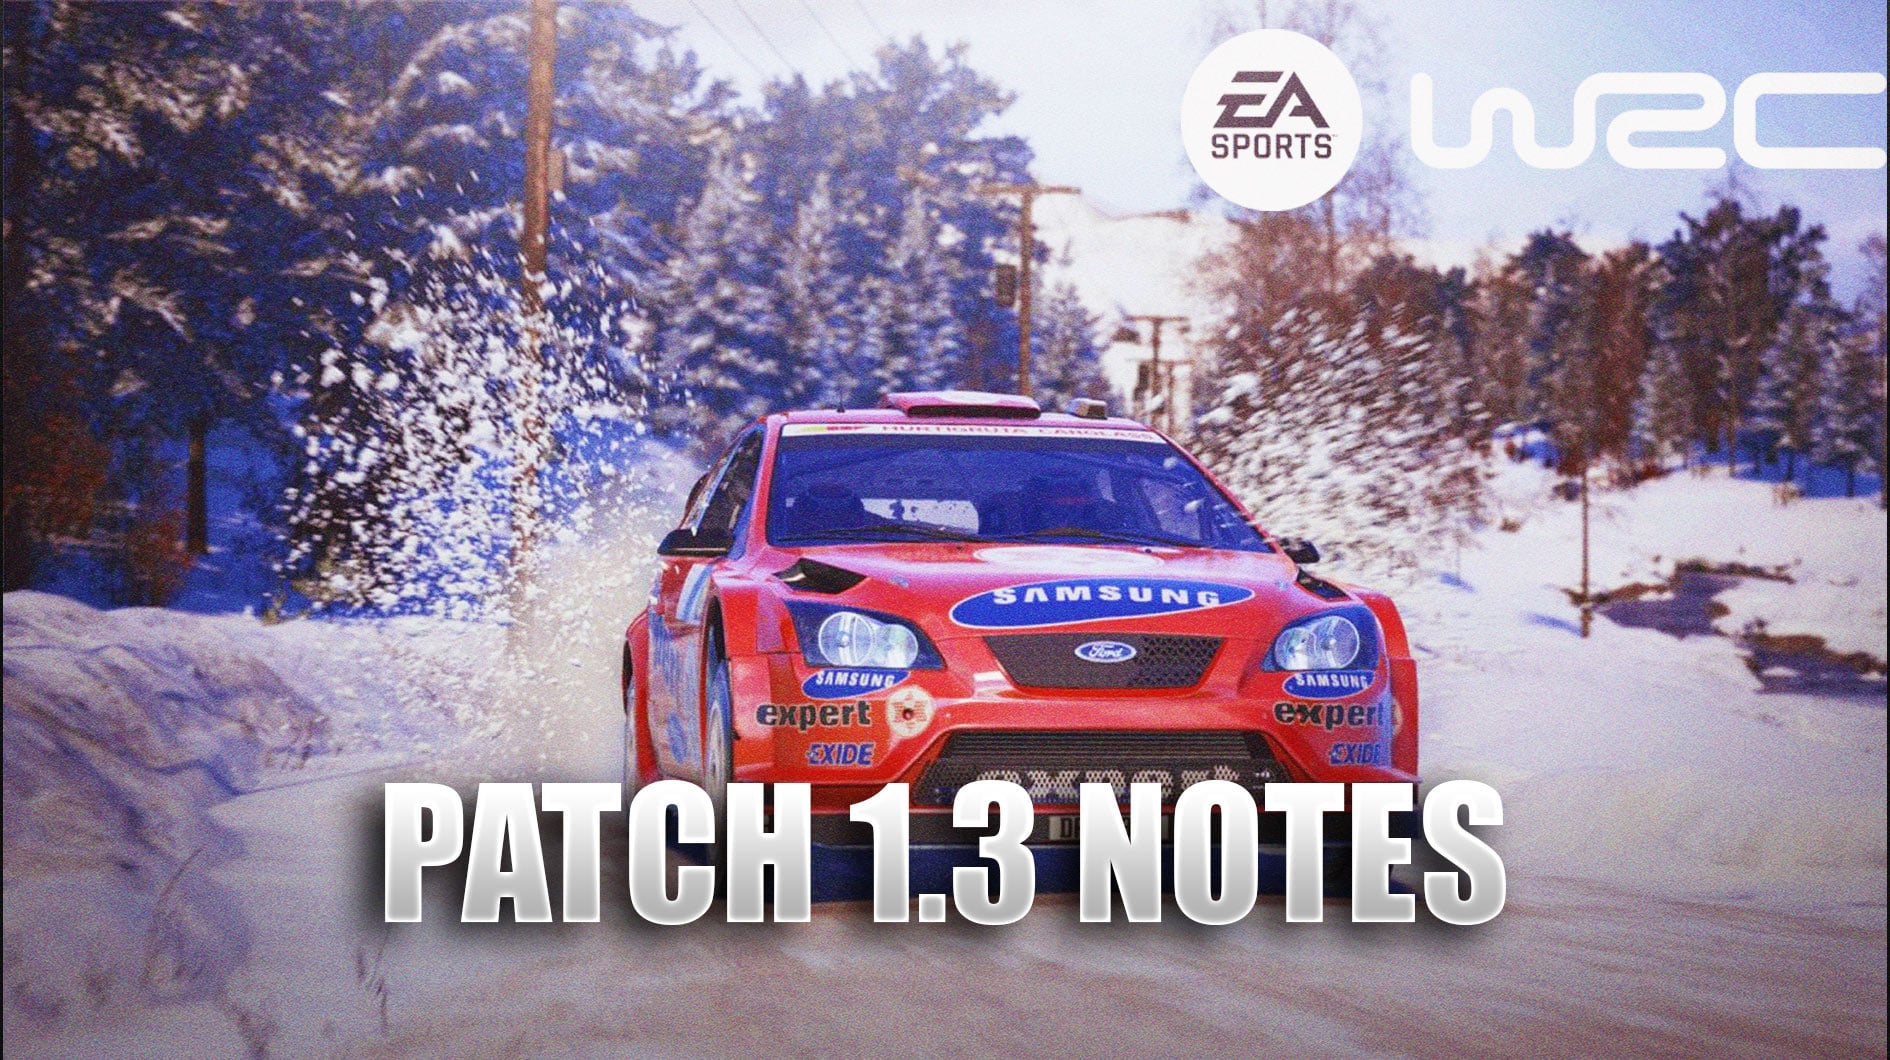 DiRT Rally 2.0 - Tips and Tricks for Beginners - Guide